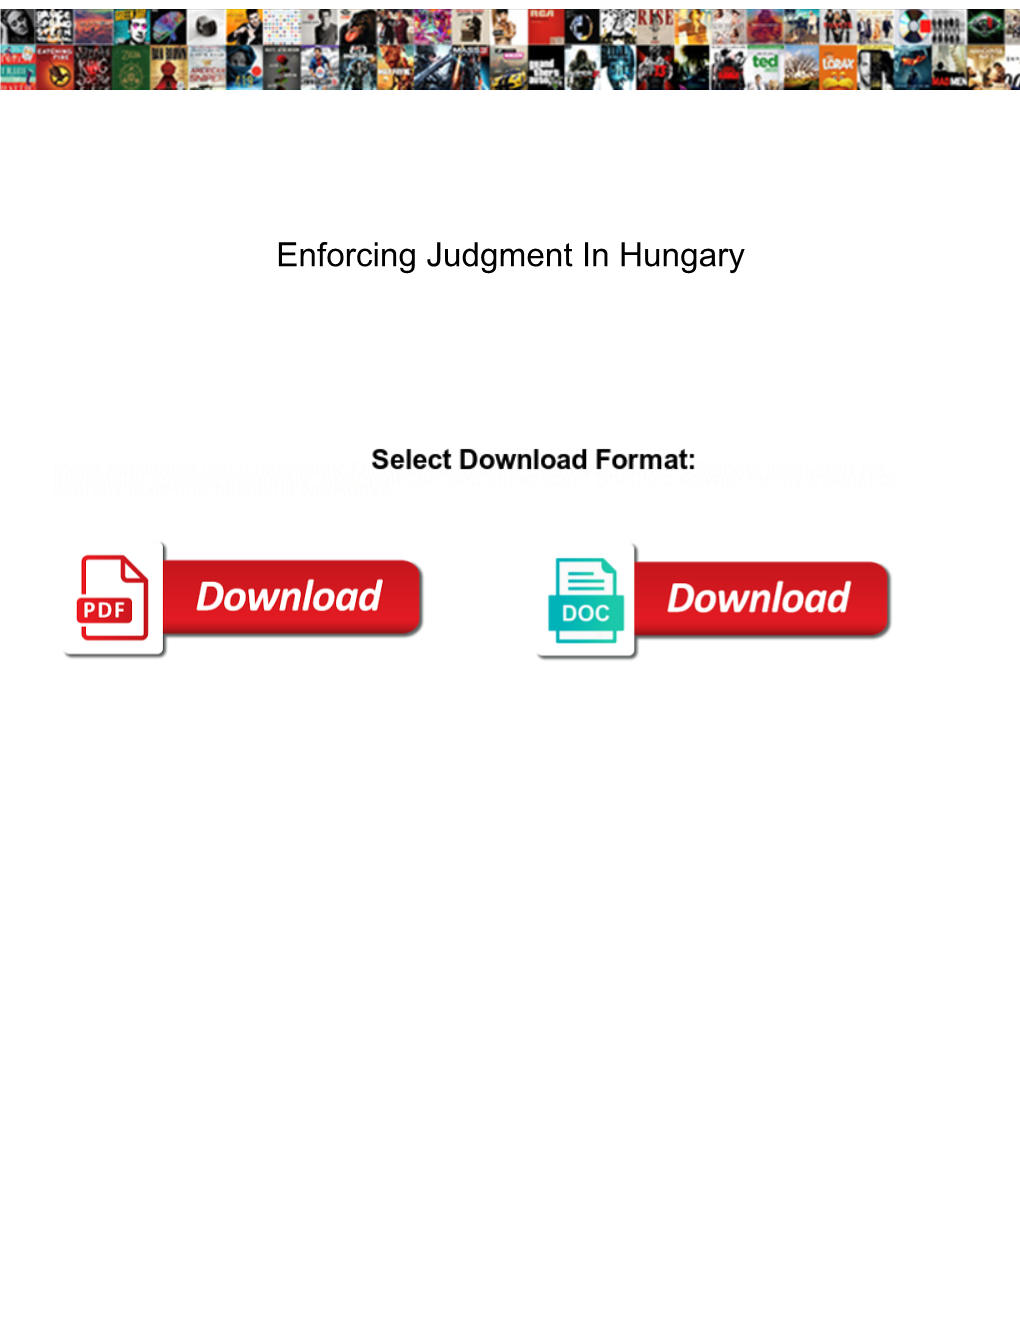 Enforcing Judgment in Hungary